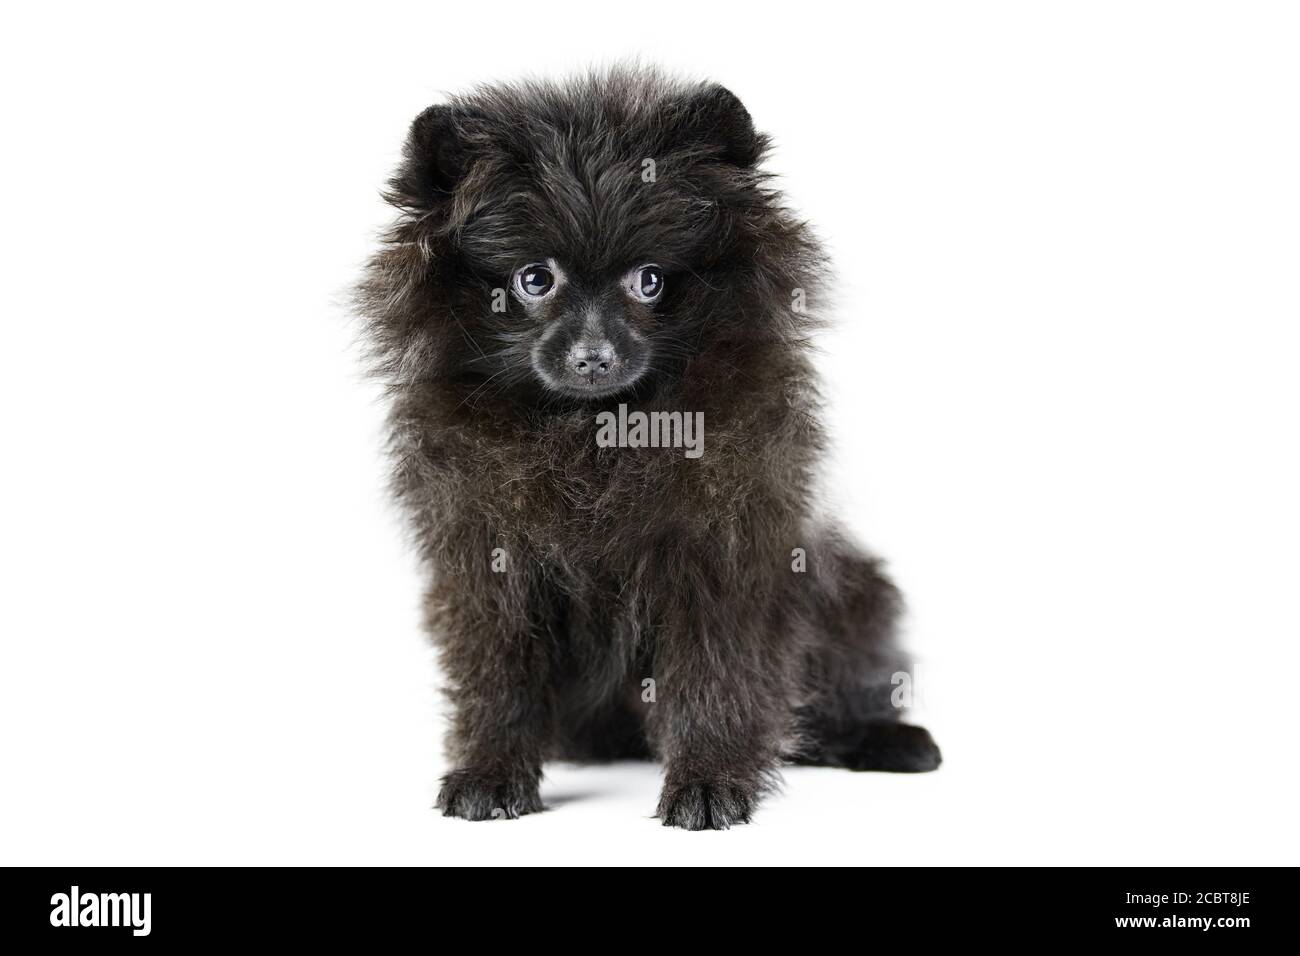 Toy Pom High Resolution Stock Photography and Images - Alamy